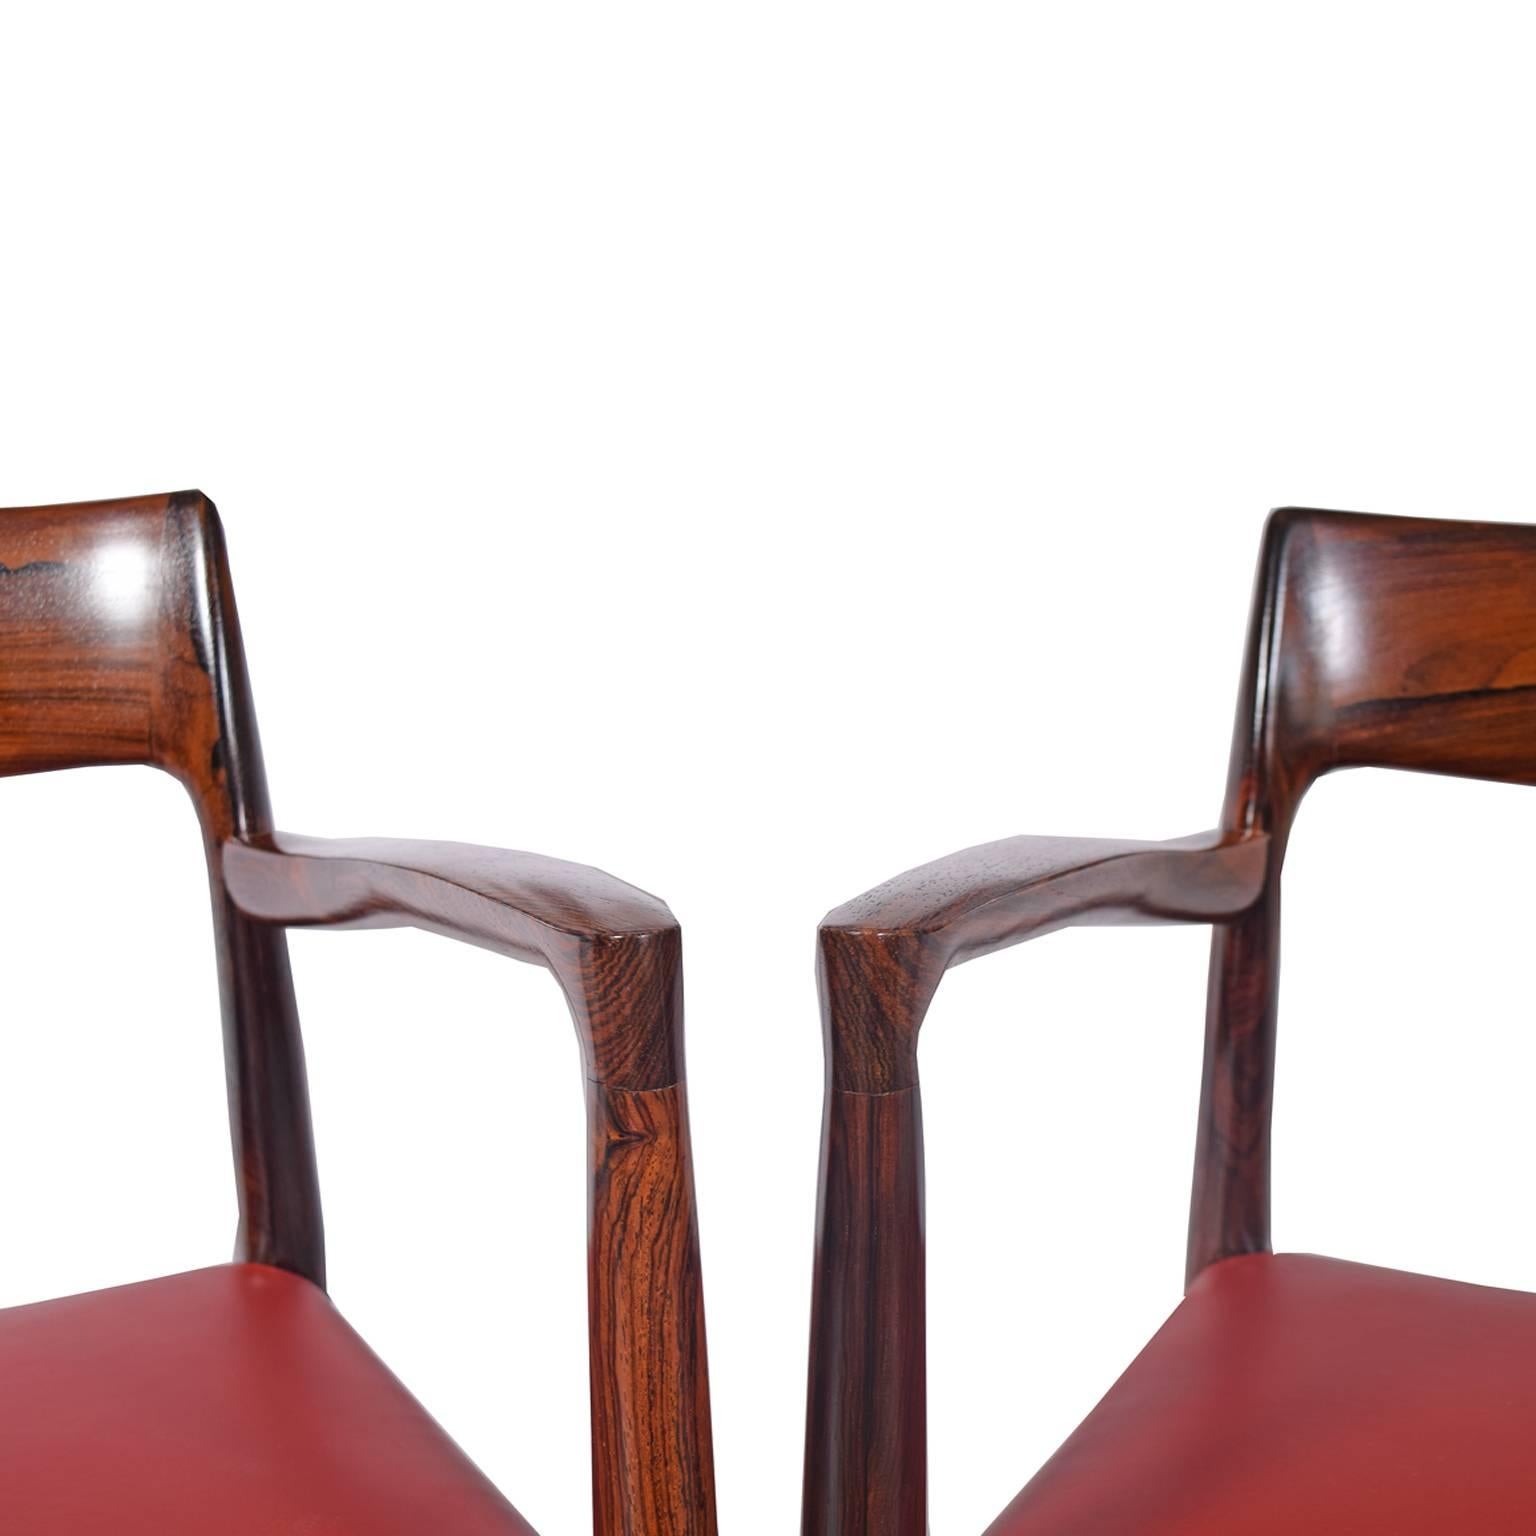 Mid-20th Century Set of Eight Rosewood Chairs by Niels O. Møller for J. L. Møller